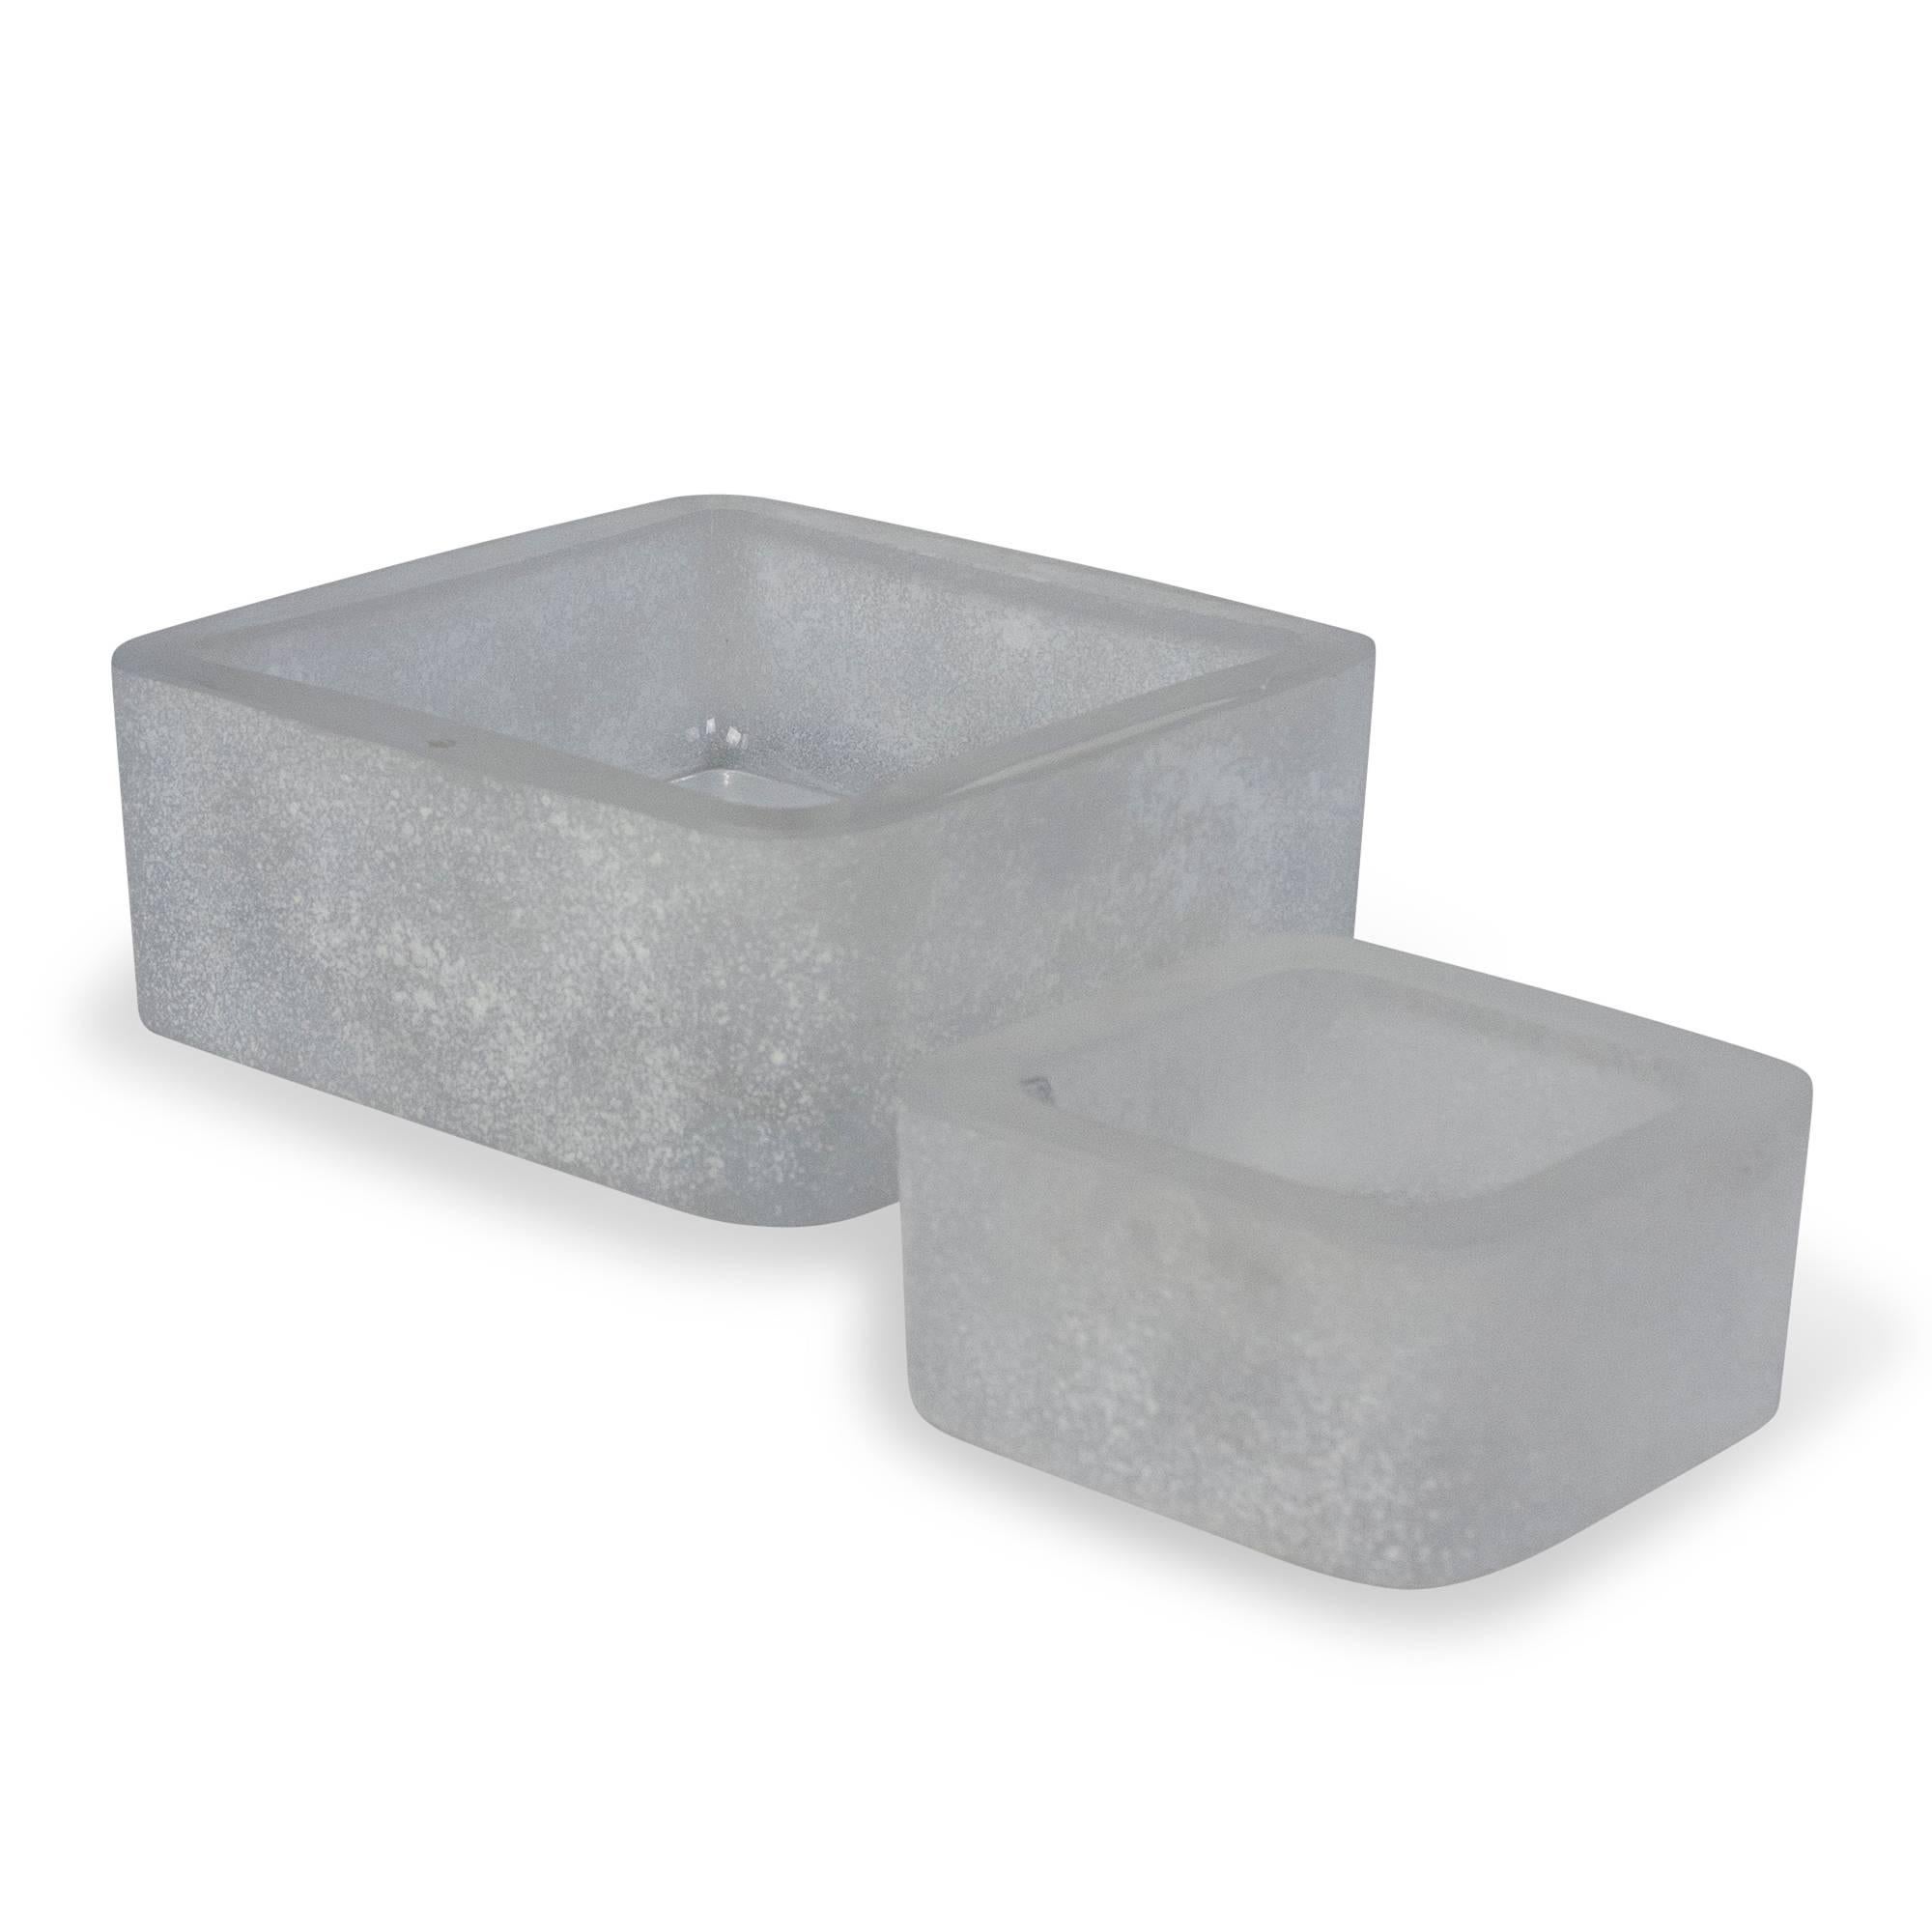 Set of two:
On left: Square white frosted glass dish, with textured sides and insides, by Seguso, Italian, 1970s. Measure: 2 3/4 high, 7 in square. (sats)

On right: Square white frosted glass dish, with textured sides and insides, by Seguso,